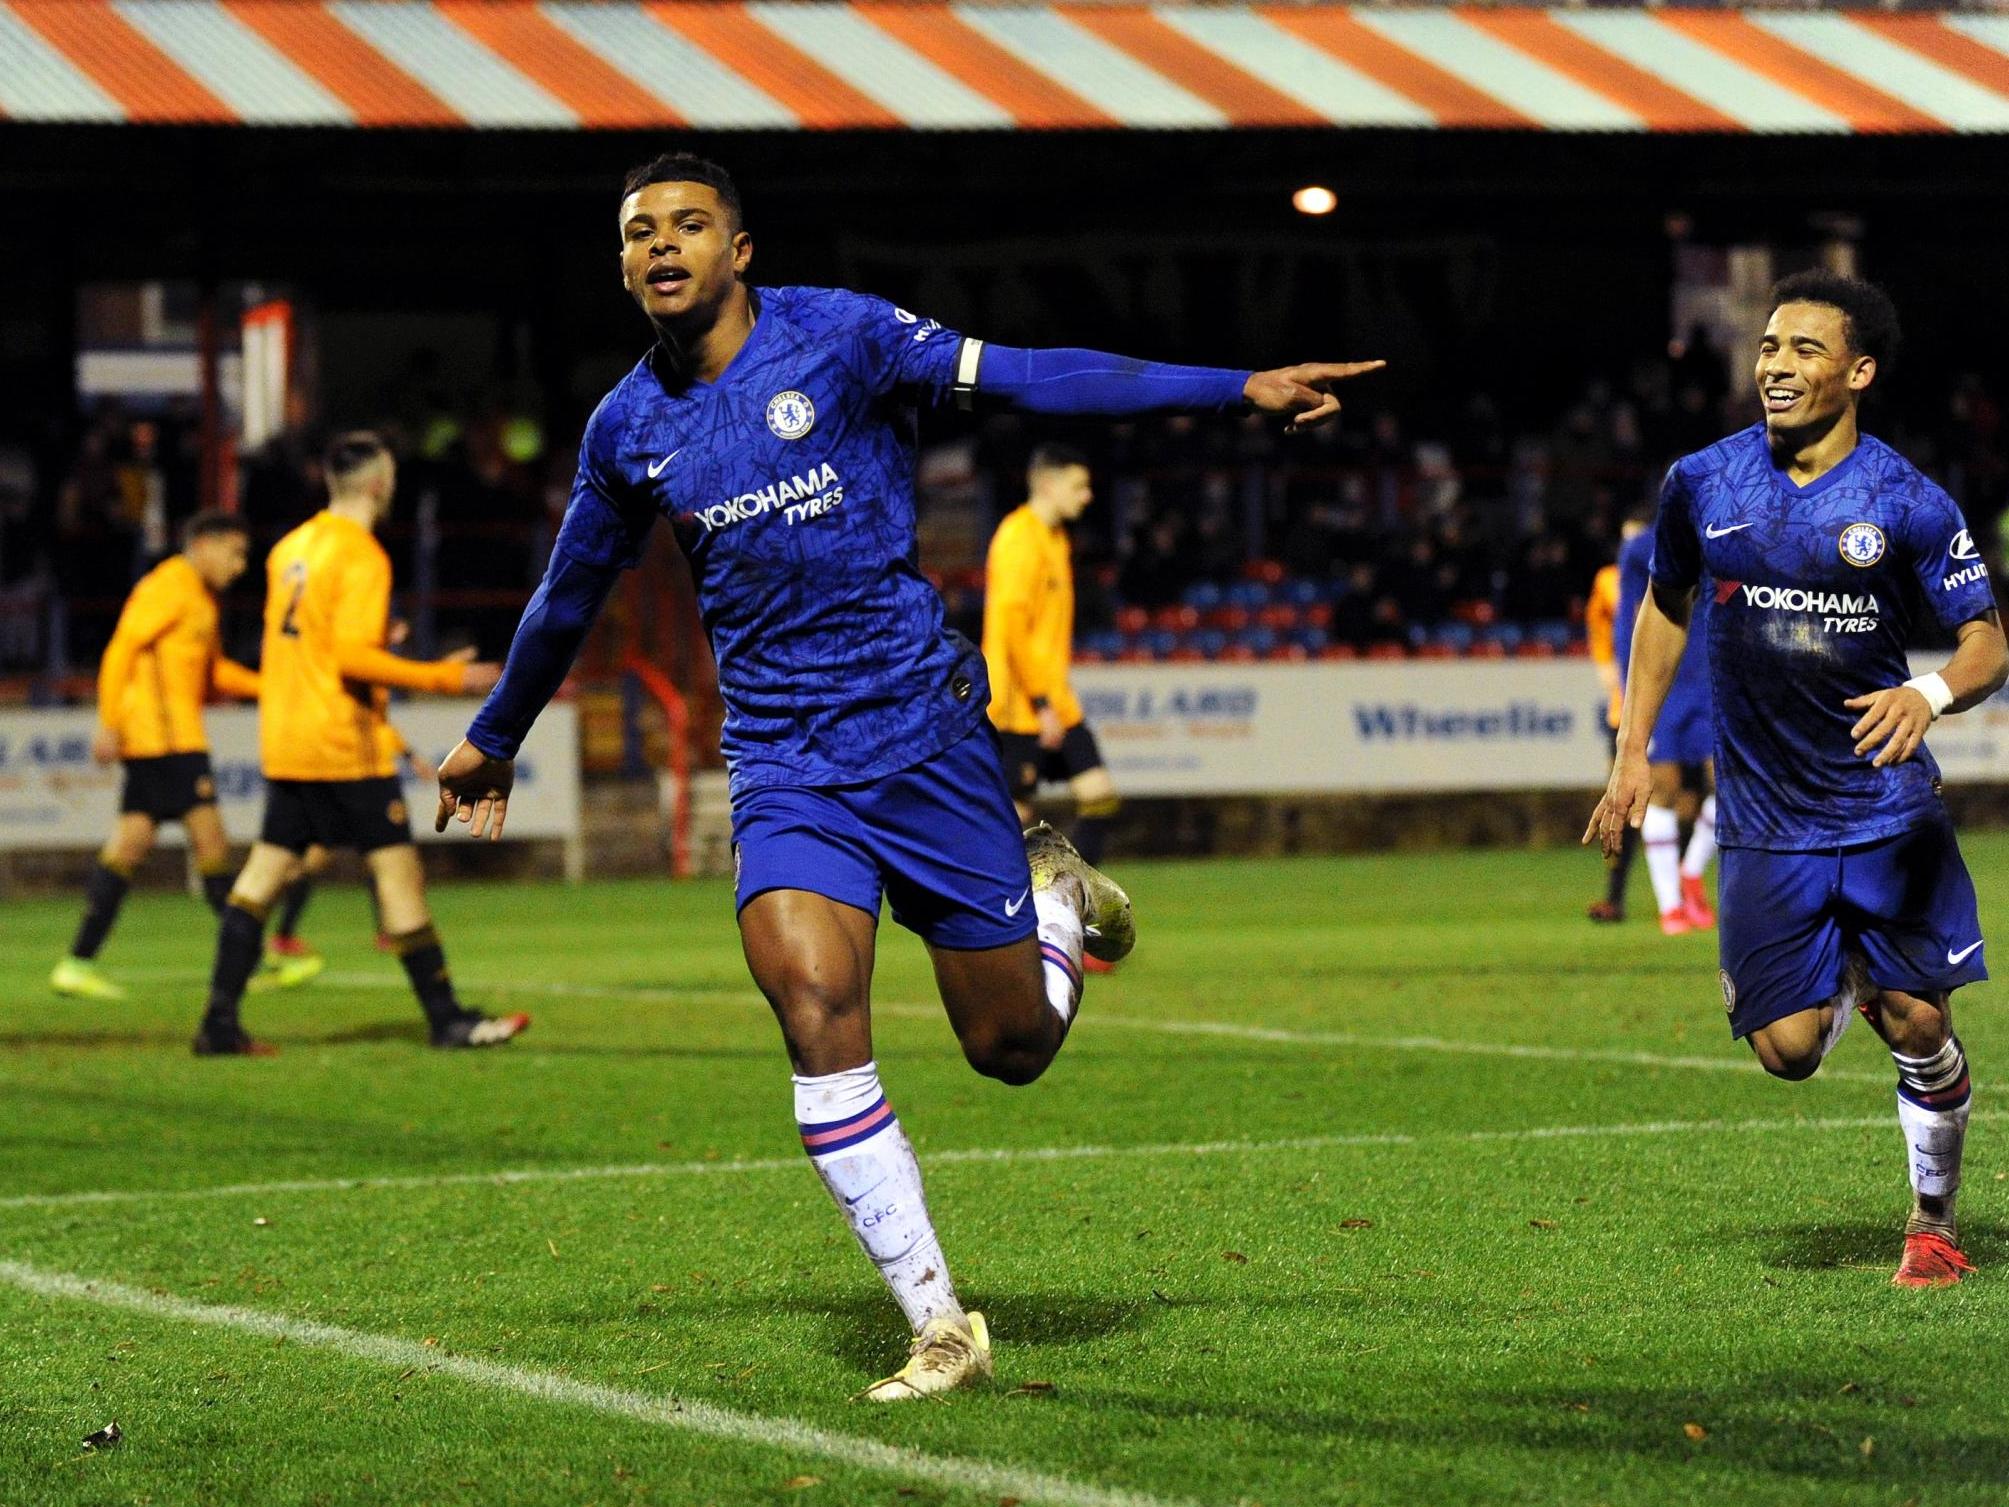 Tino Anjorin celebrates after scoring against Wolves in the FA Youth Cup